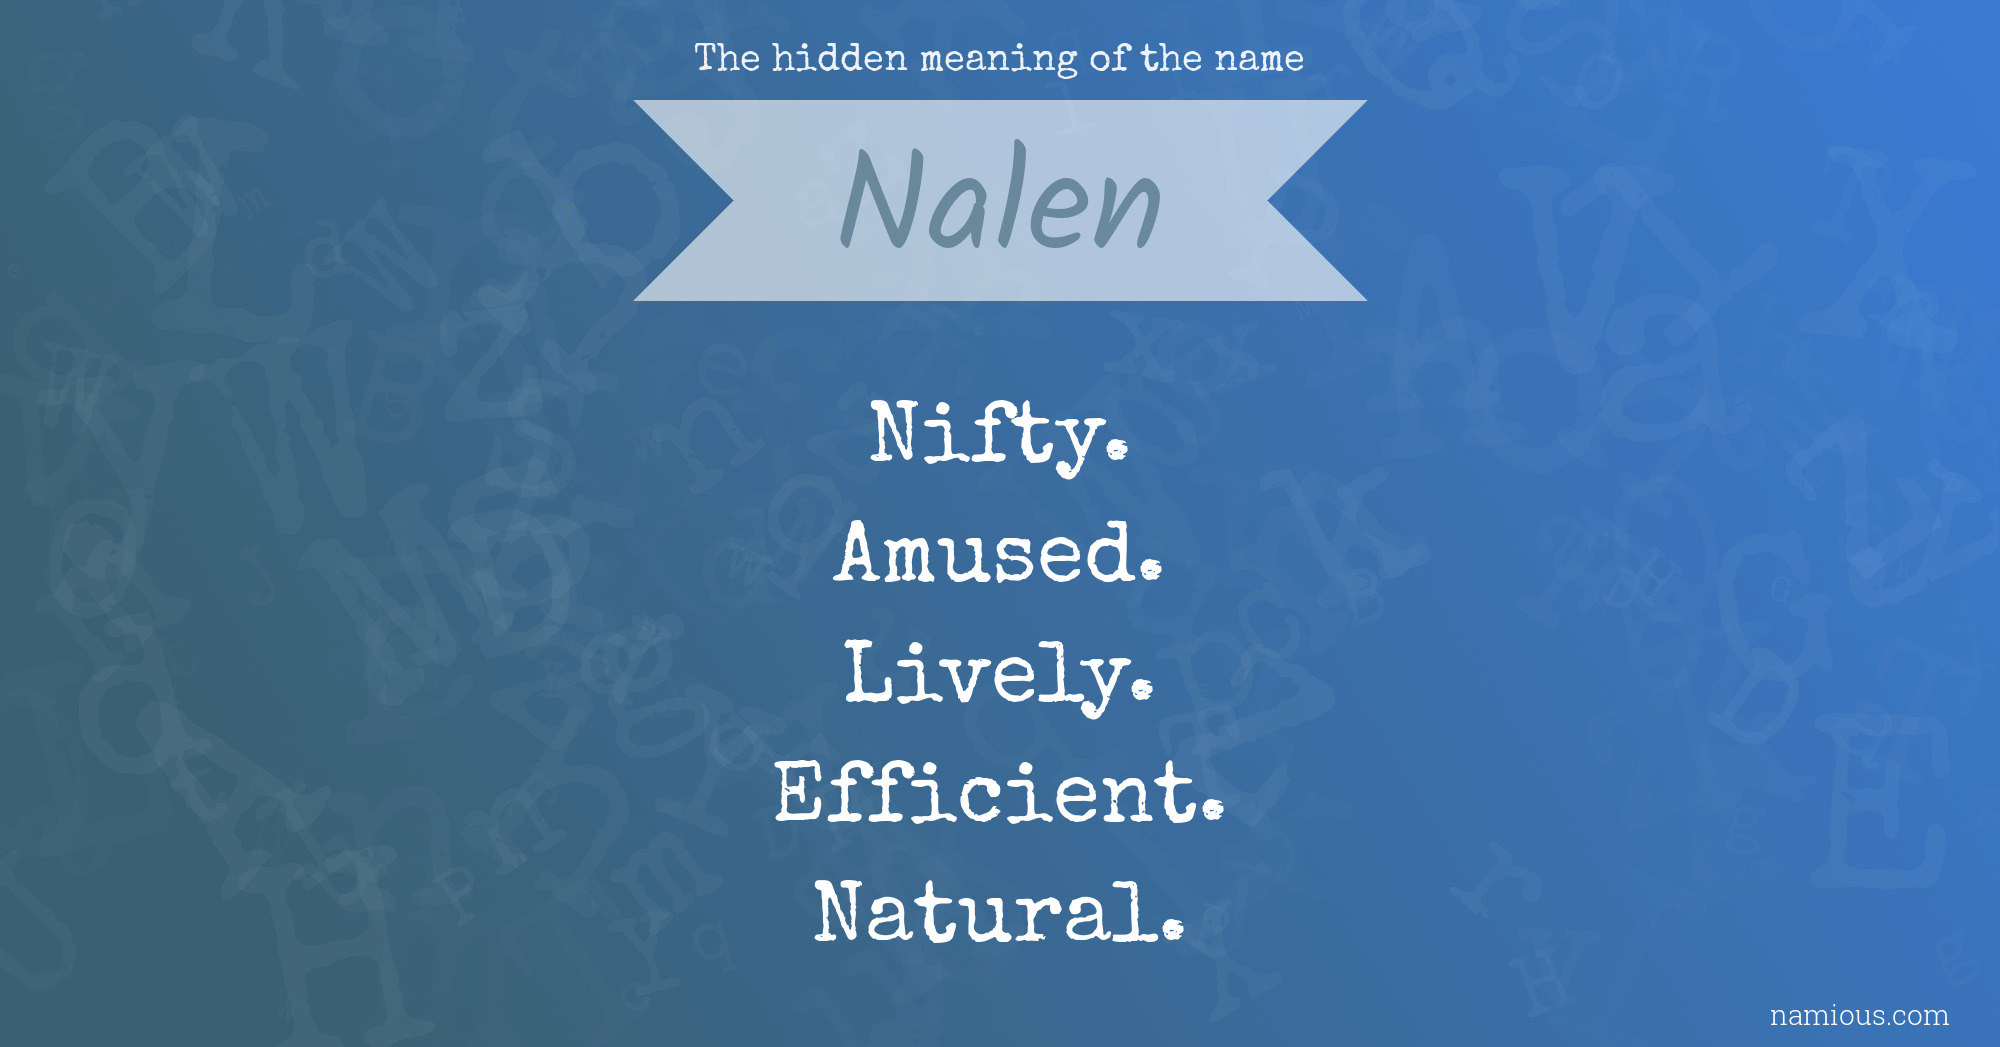 The hidden meaning of the name Nalen